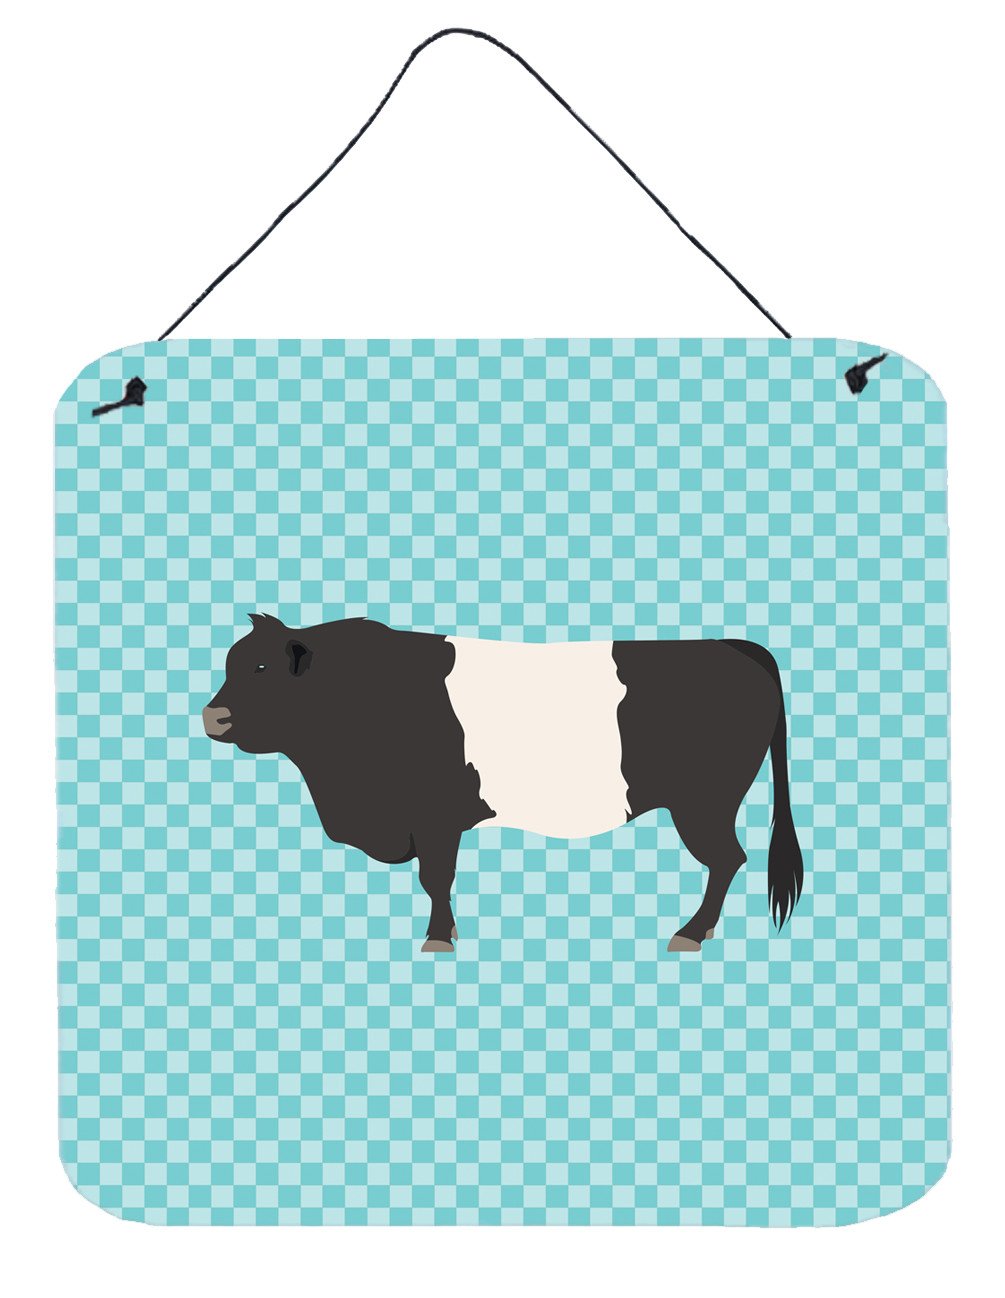 Belted Galloway Cow Blue Check Wall or Door Hanging Prints BB8005DS66 by Caroline's Treasures